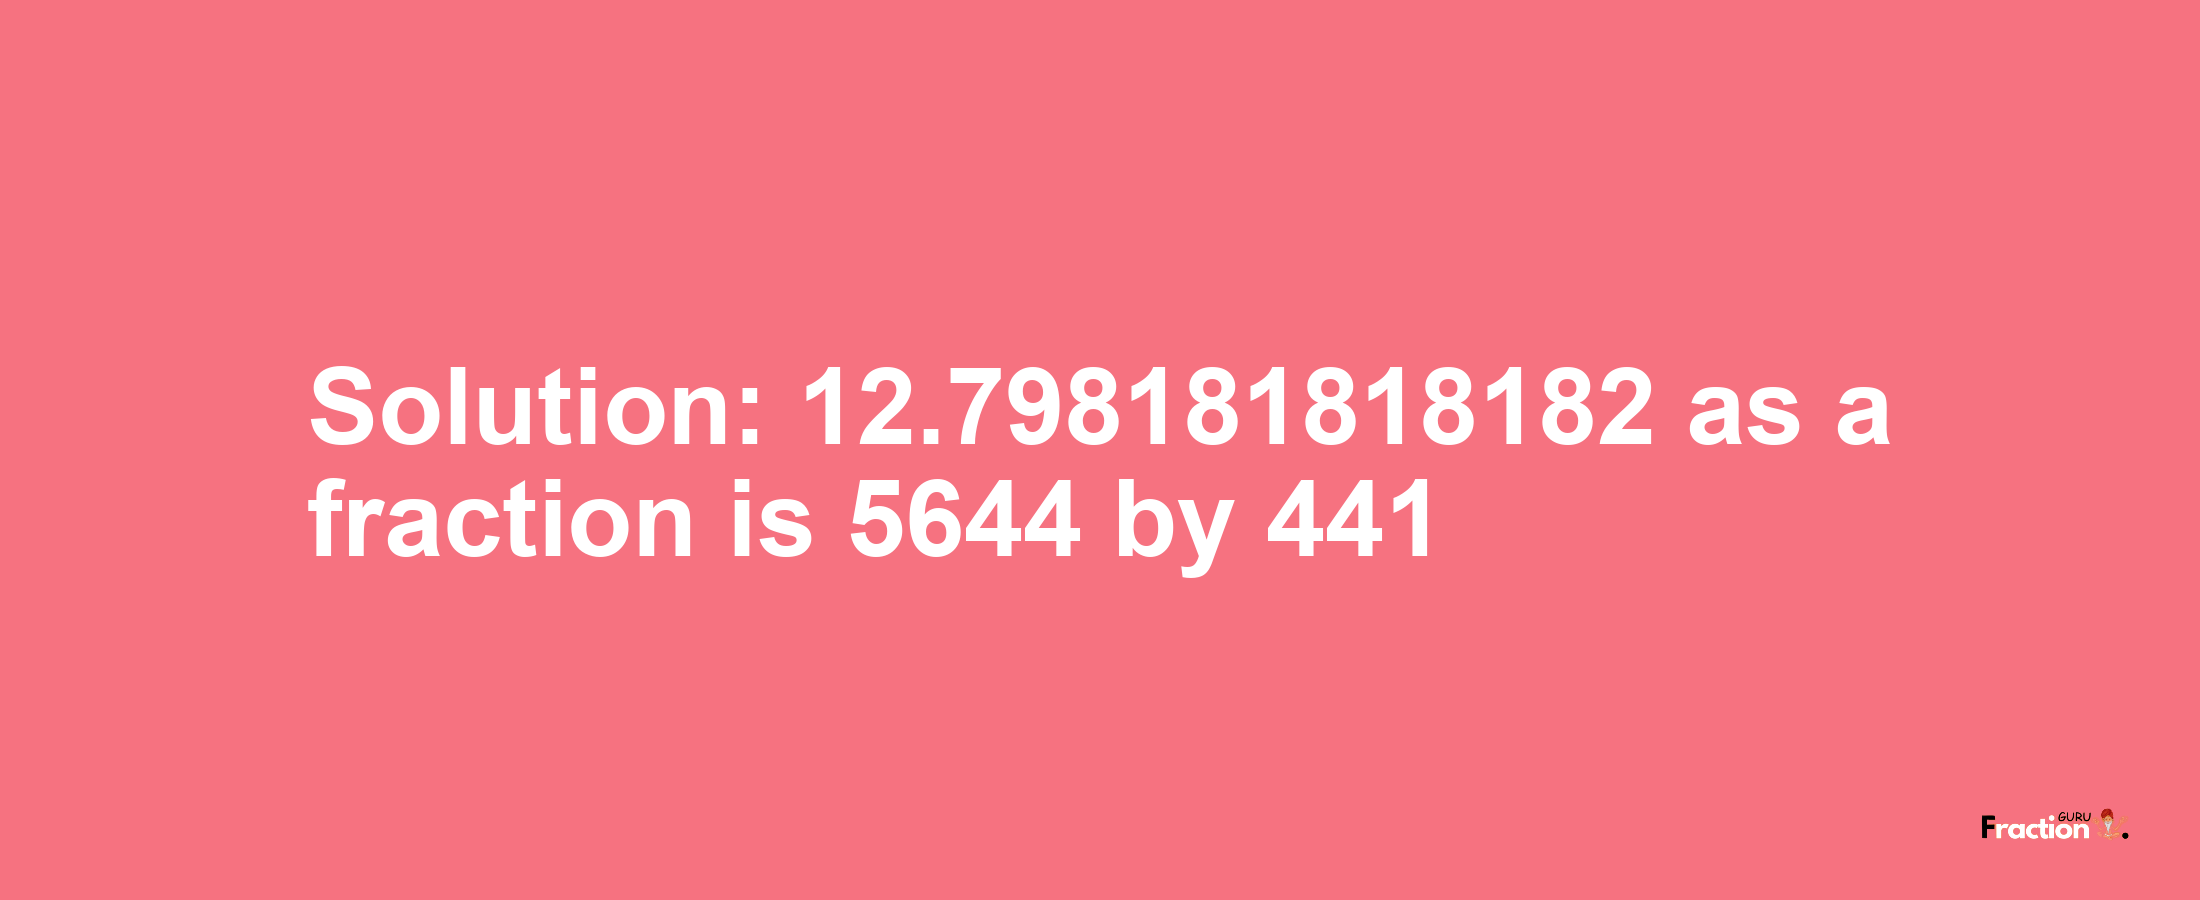 Solution:12.798181818182 as a fraction is 5644/441